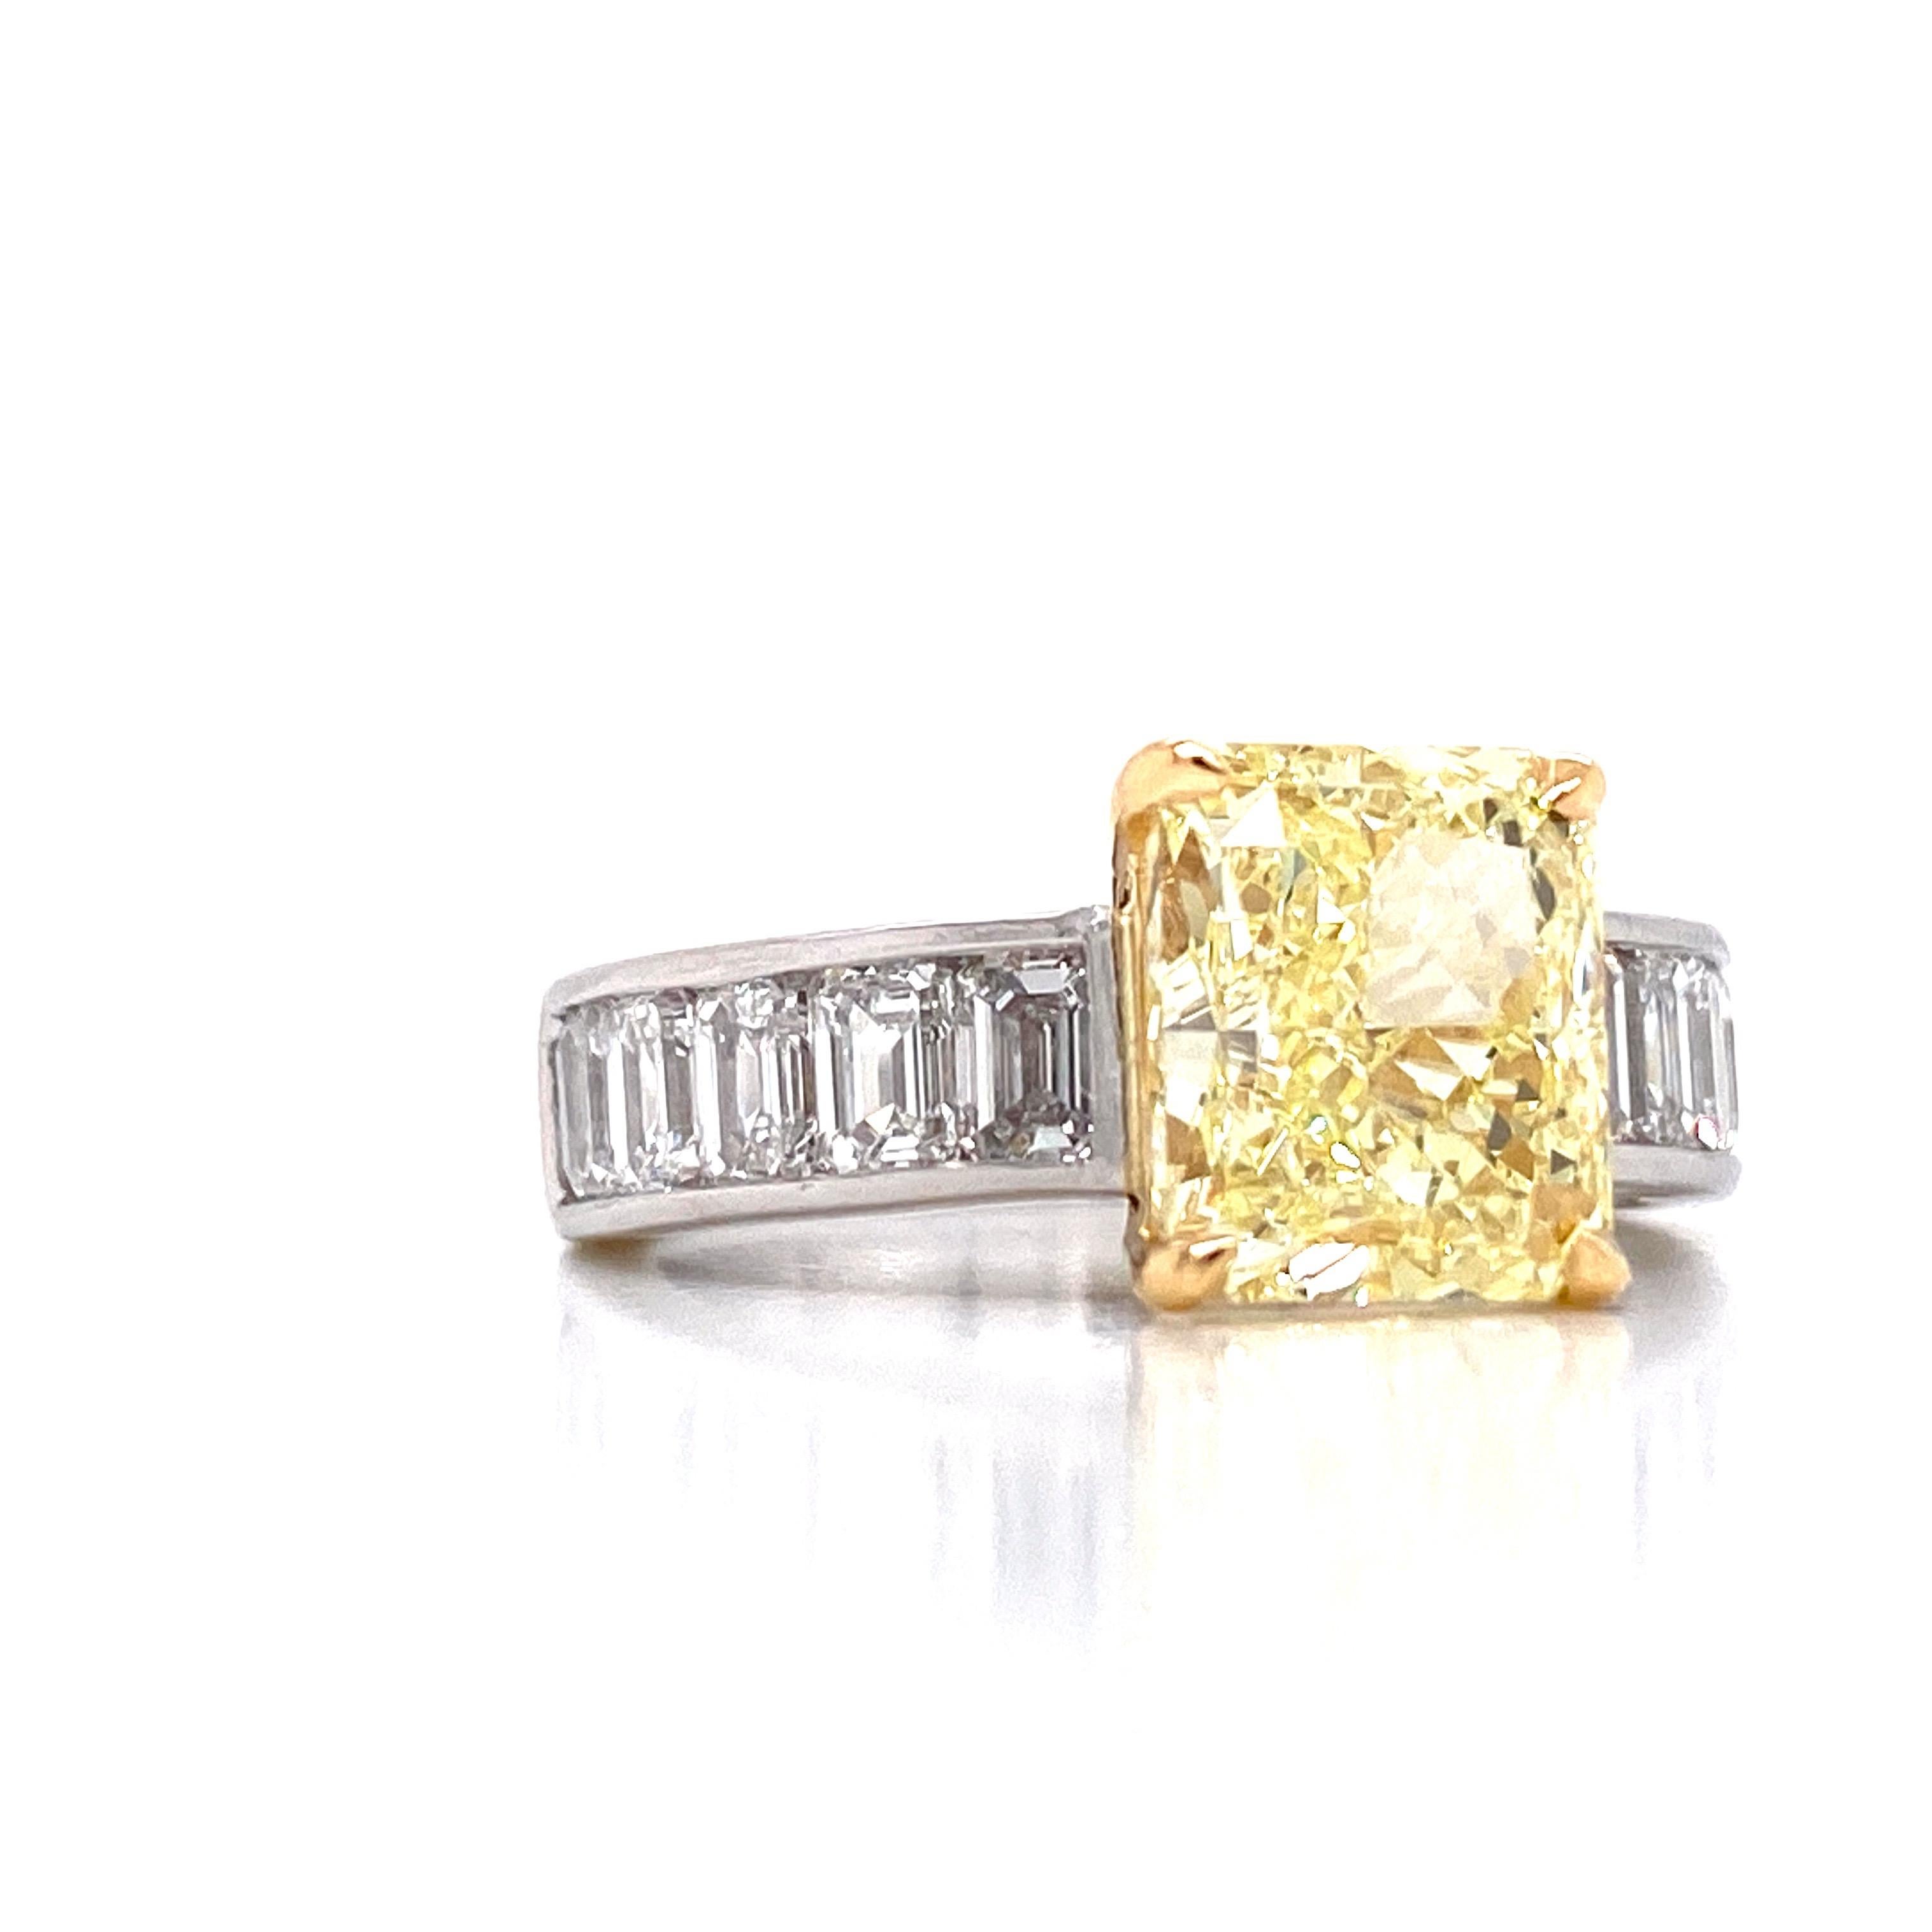 From the Emilio Jewelry Vault, Showcasing a stunning 3.50ct Gia Certified natural pure fancy yellow diamond set in the center. The mounting was specially made for the center stone.
 Emilio is an expert in natural fancy colored diamonds and